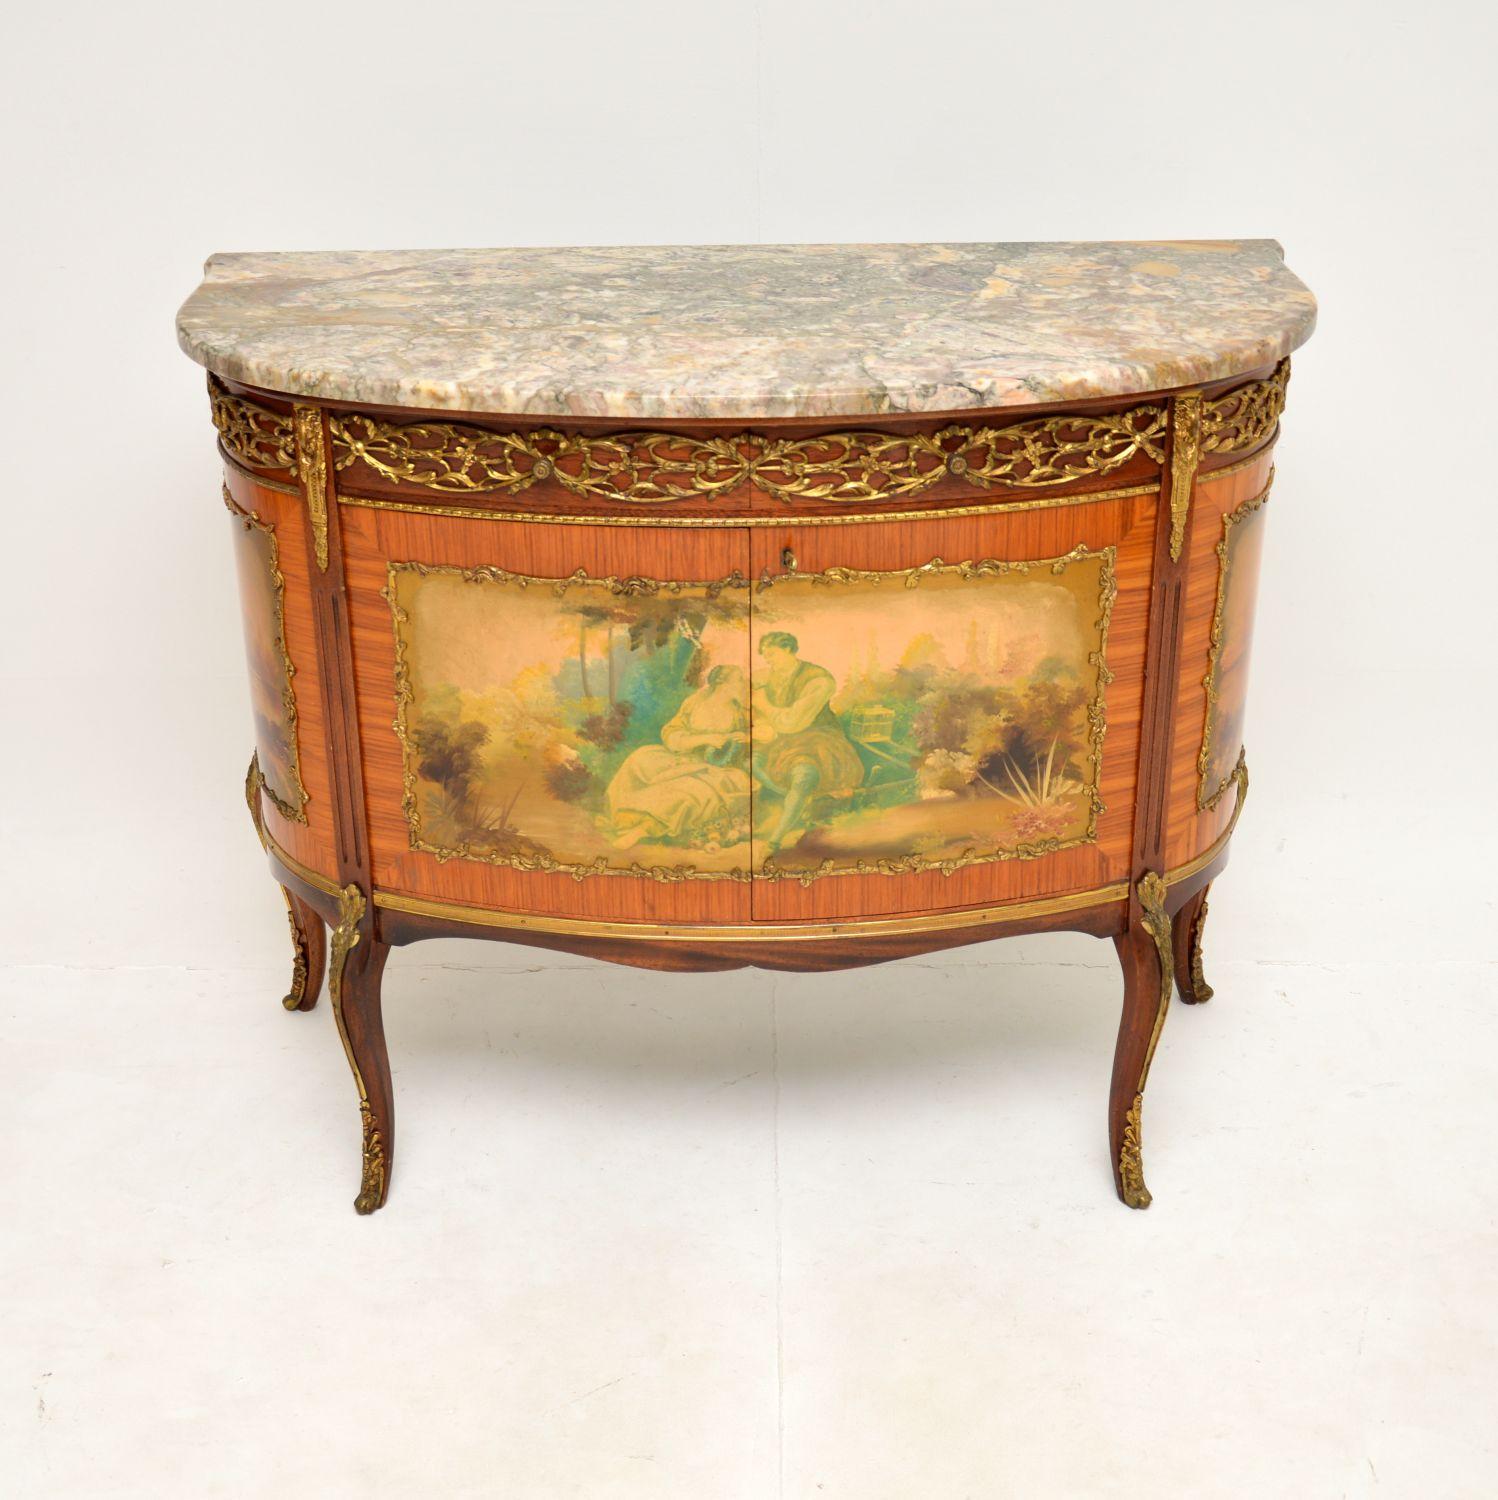 A stunning antique French marble top painted cabinet. This was made in France, it dates from around the 1920-30’s.

It is of superb quality, this is a useful size and has a gorgeous marble top with a bow fronted edge. The cabinet has absolutely